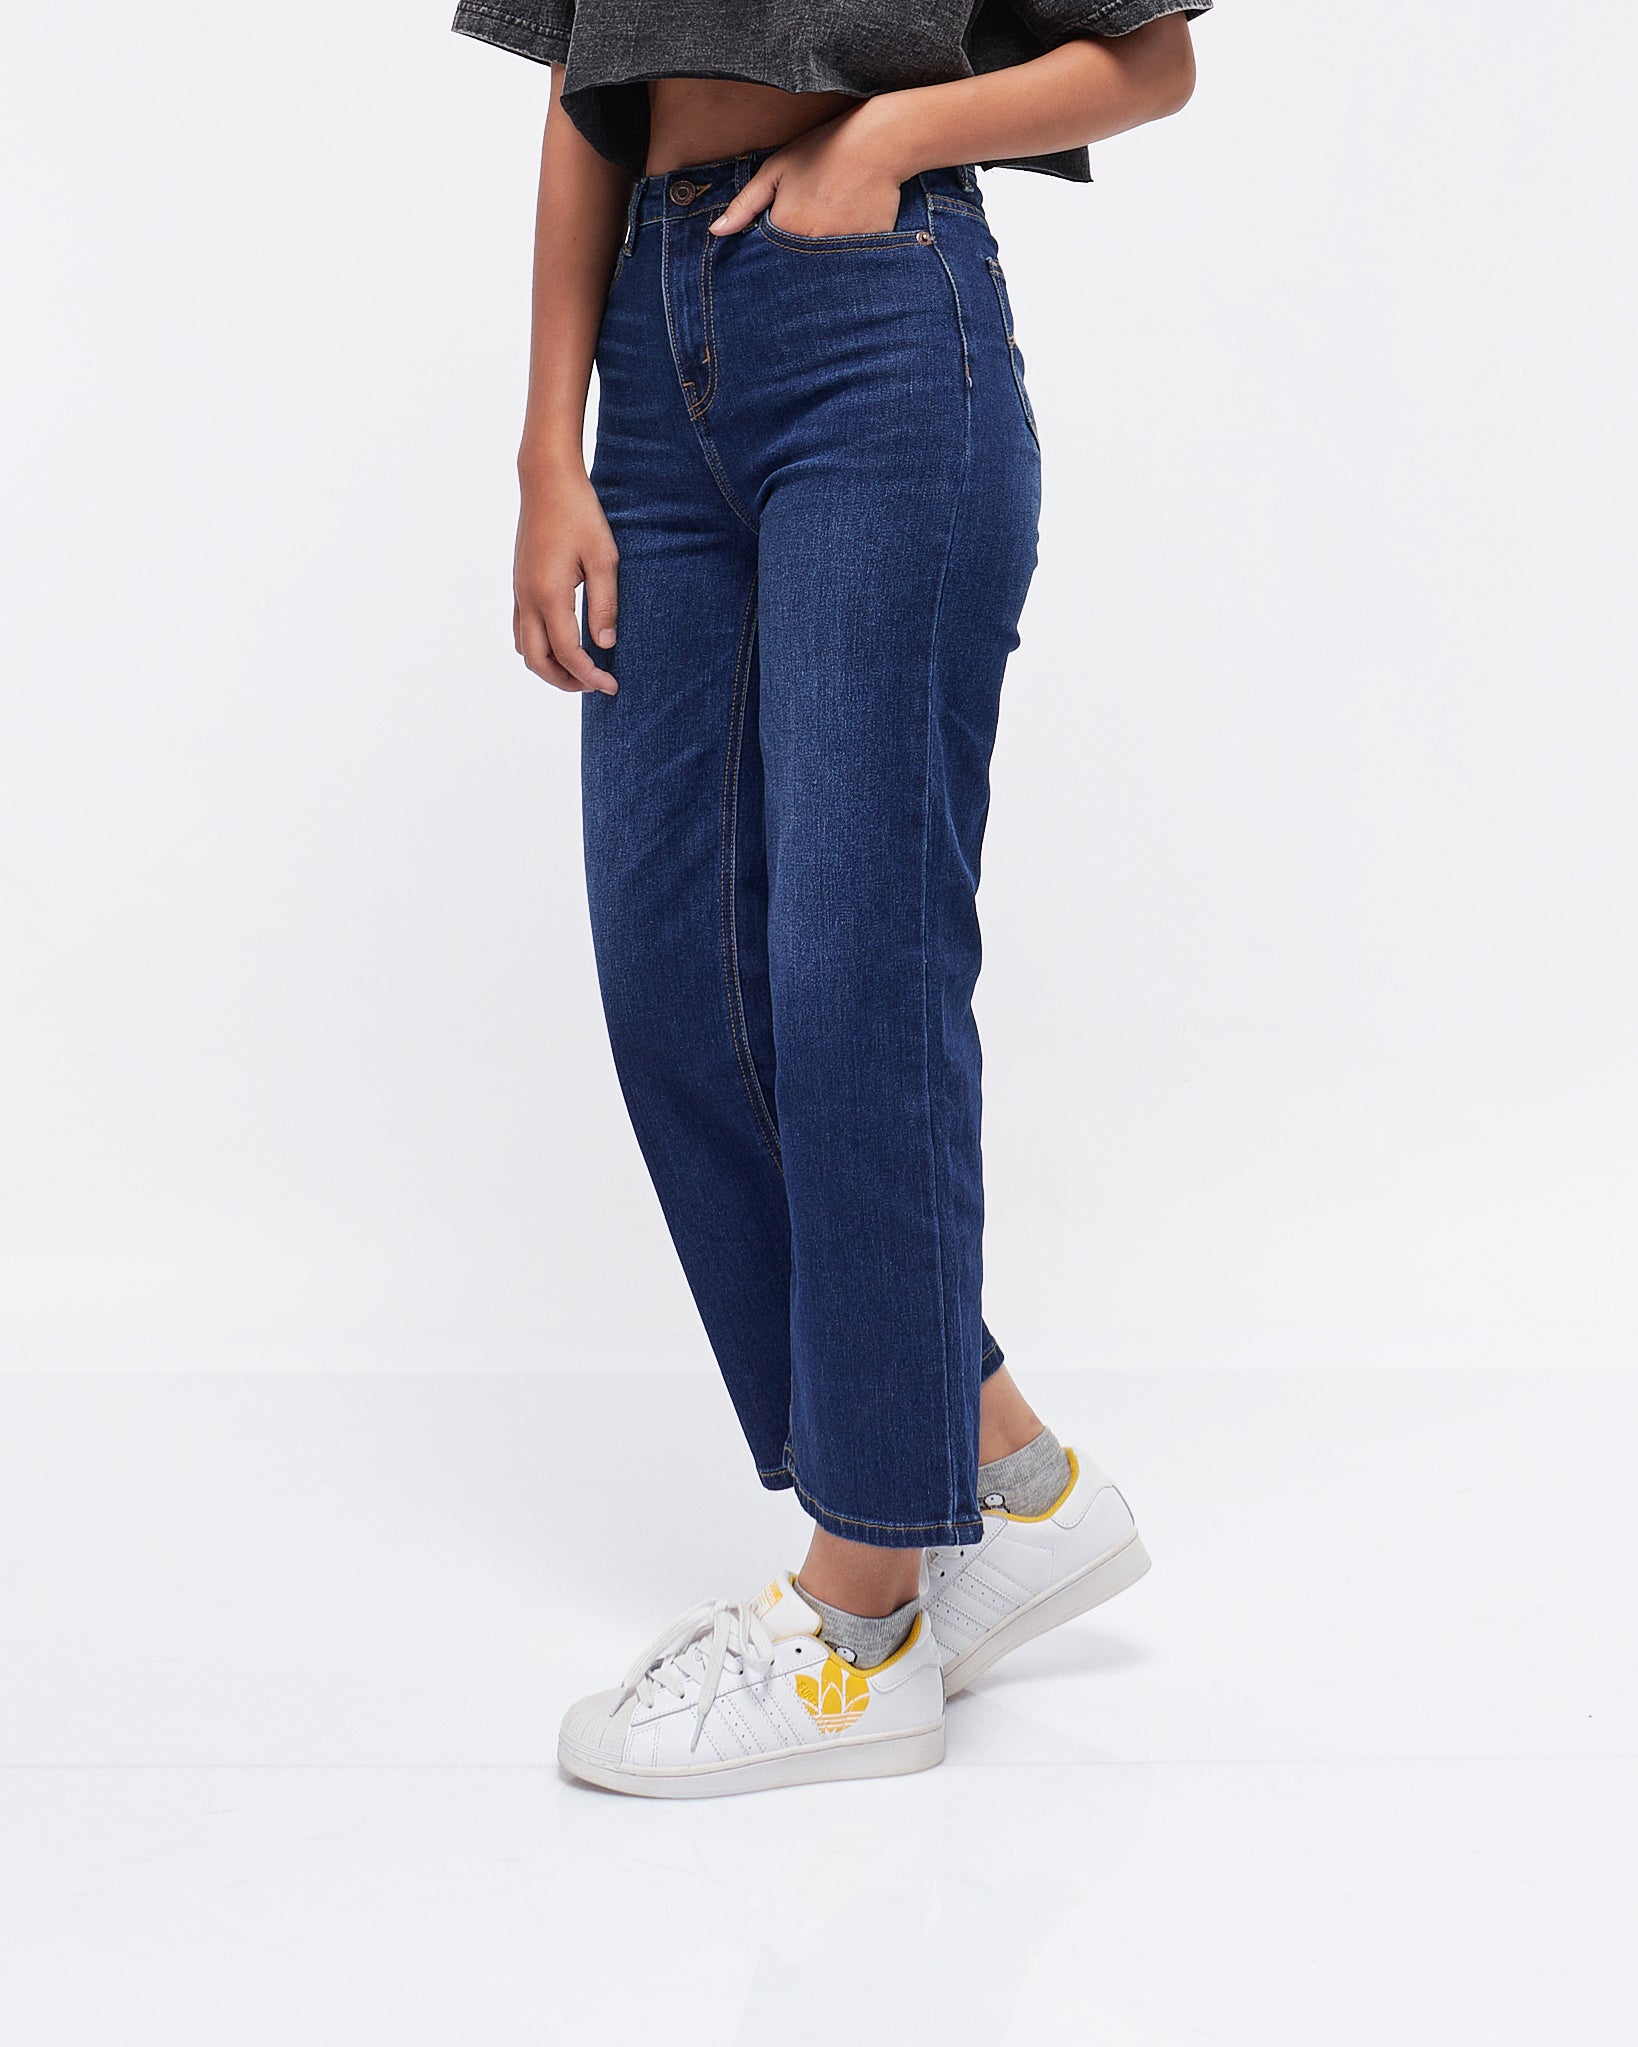 MOI OUTFIT-High Waist Wide Leg Lady Jeans 19.90